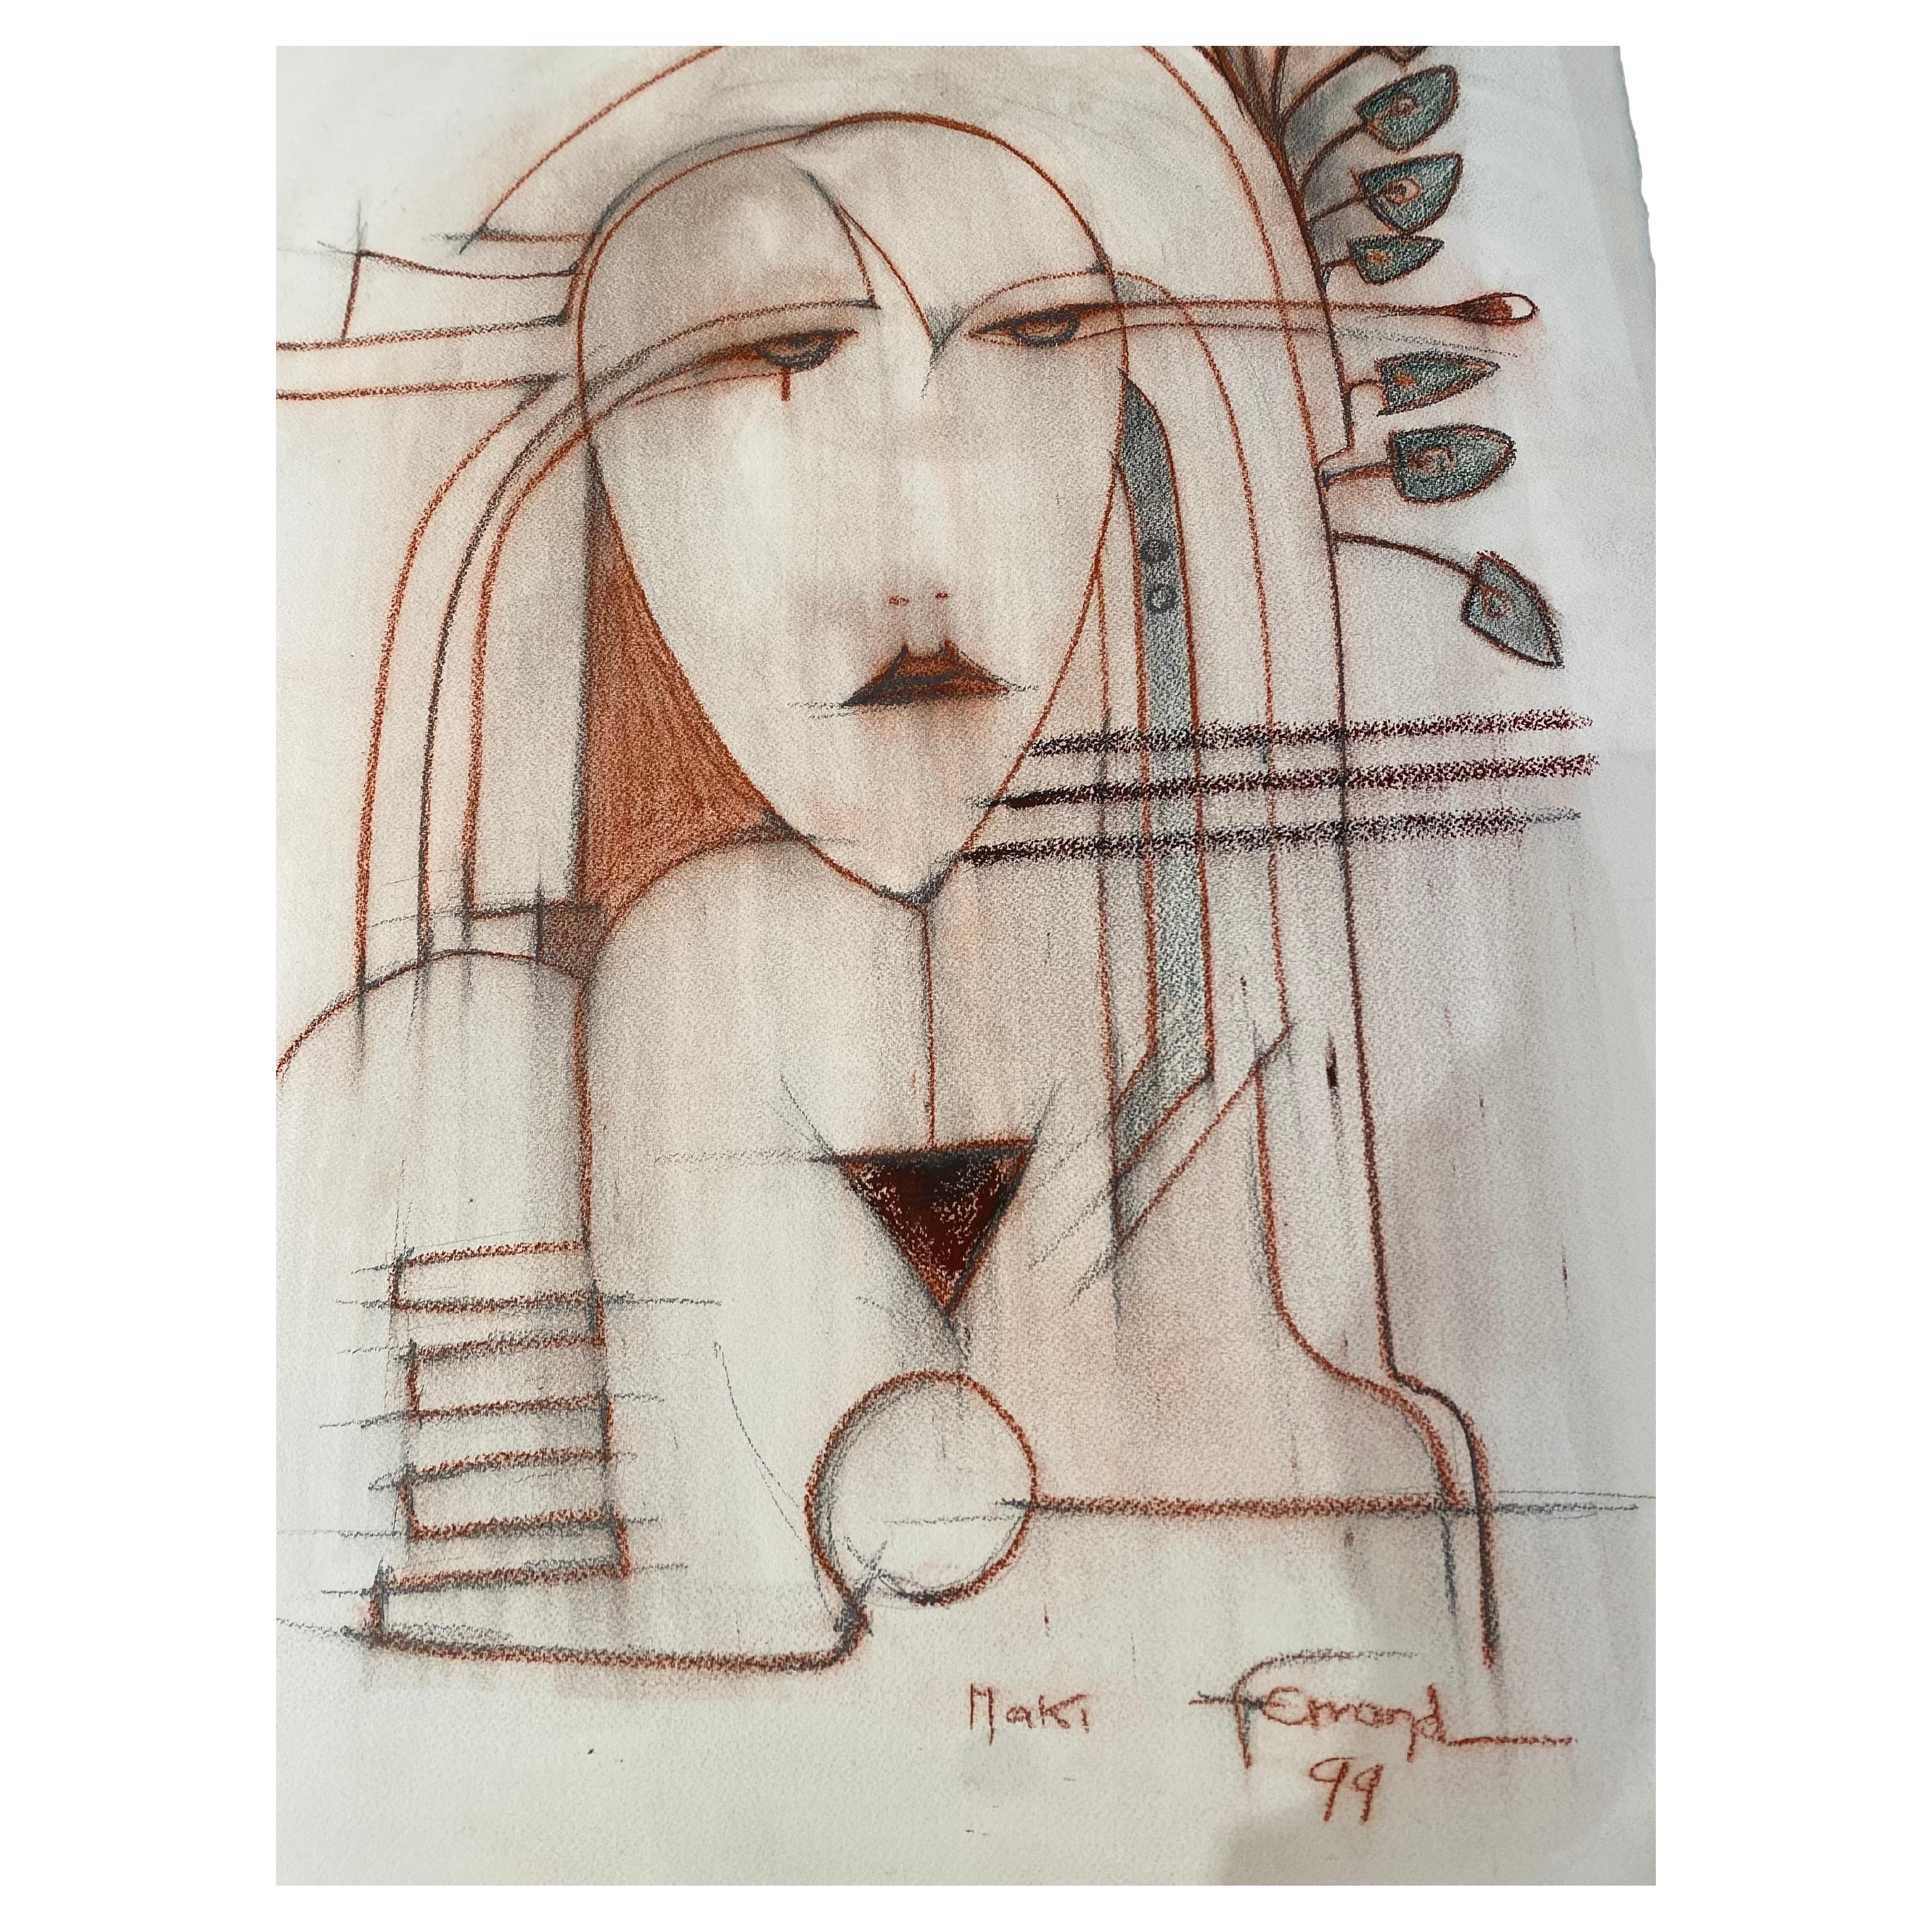 Sanguine by André Ferrand " Maki" For Sale